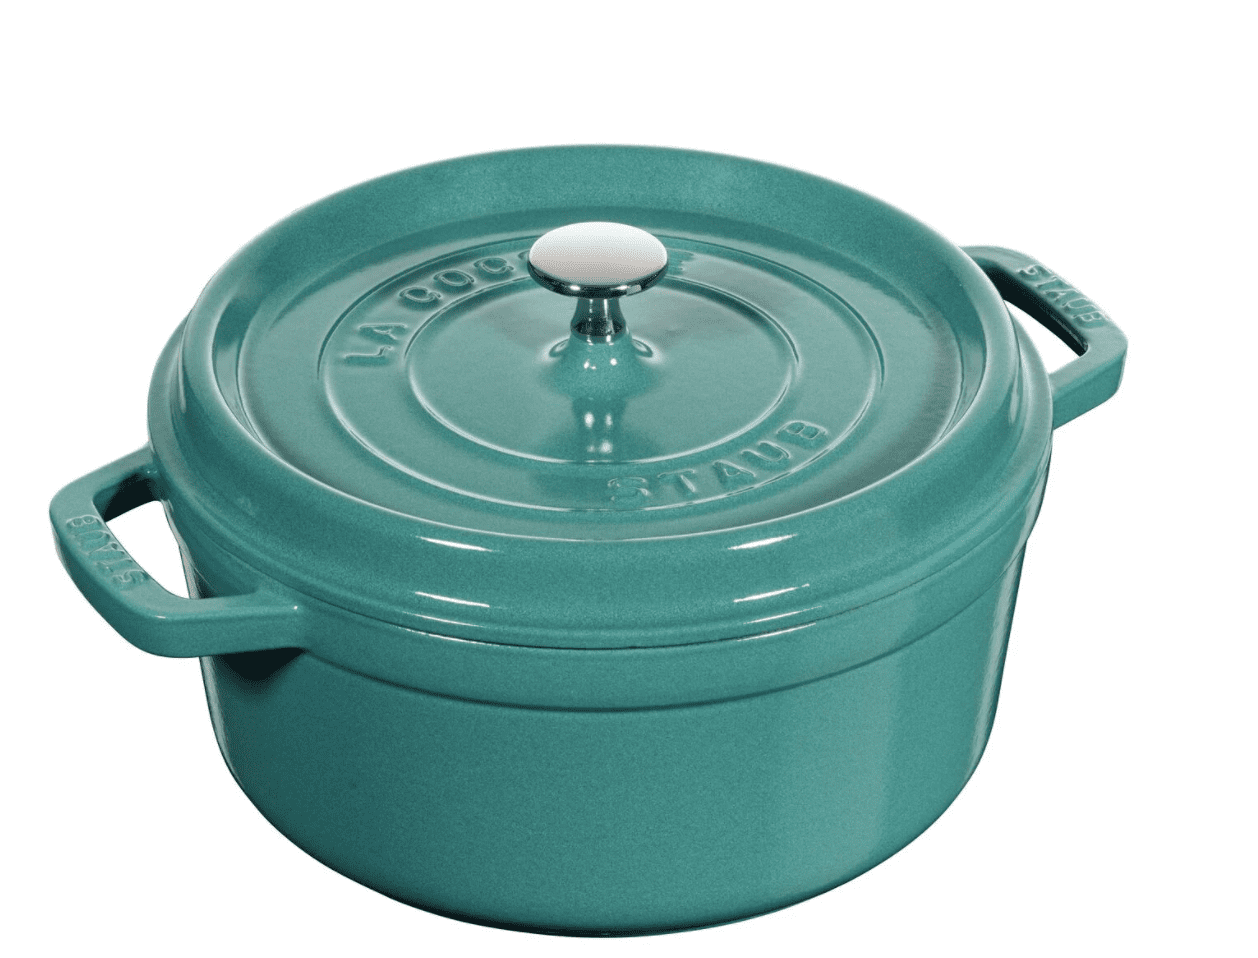 http://cdn.apartmenttherapy.info/image/upload/v1647451047/Round%20Cocotte%2C%204%20qt.%2C%20Turquoise%20%28Visual%20Imperfections%29.png